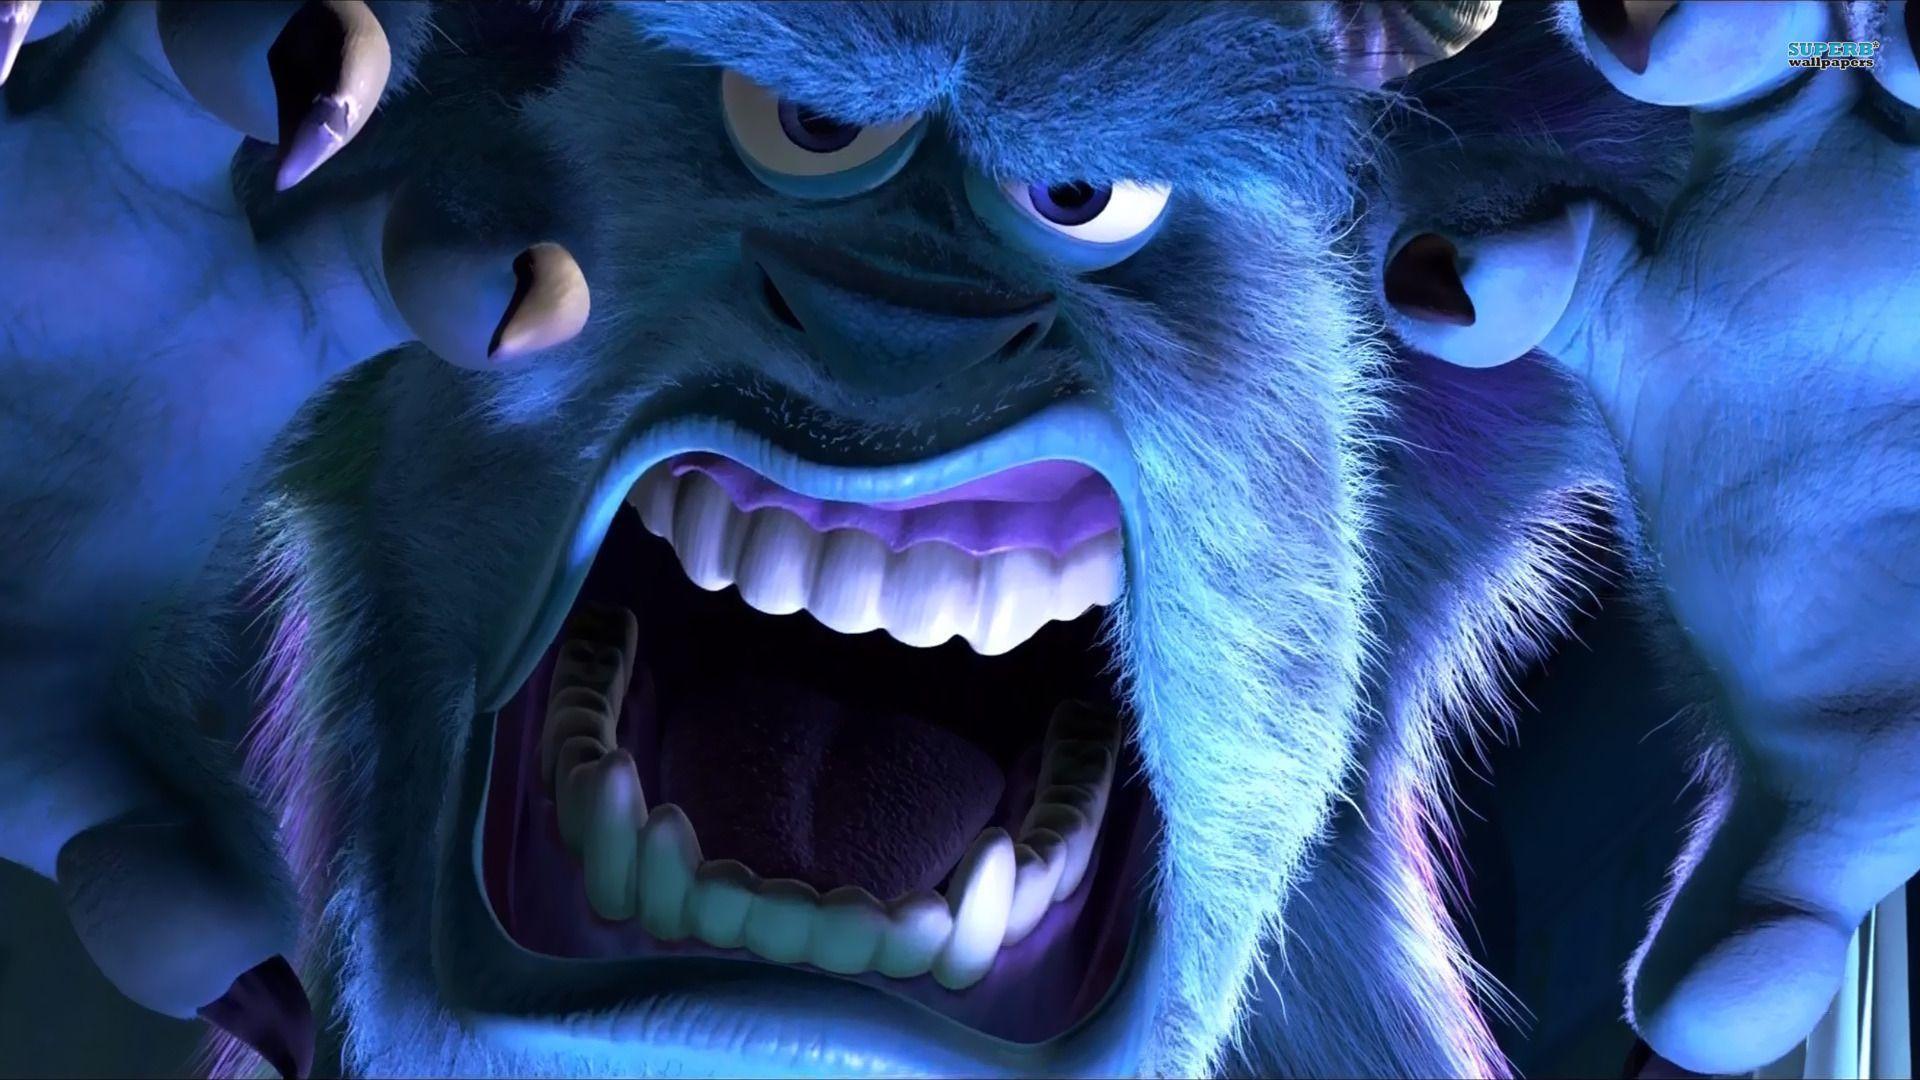 Monsters Inc. Wallpaper HD free Download. Where The Wild Things